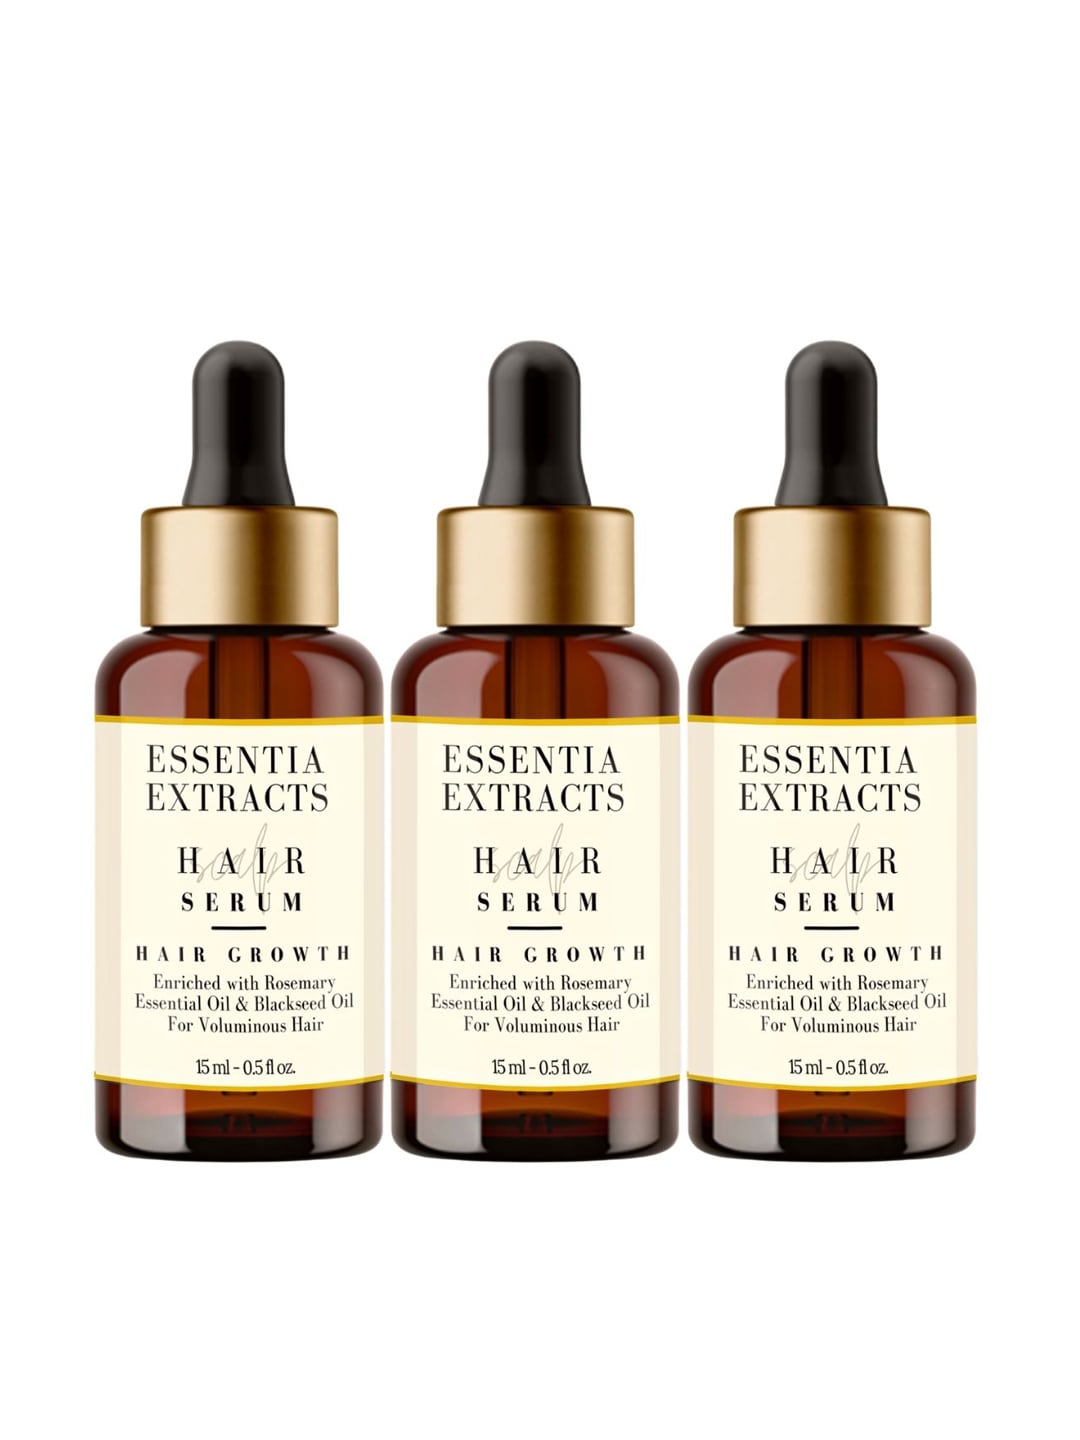 ESSENTIA EXTRACTS Pack of 3 Hair Growth Serum With Rosemary Oil-15ml Each Price in India